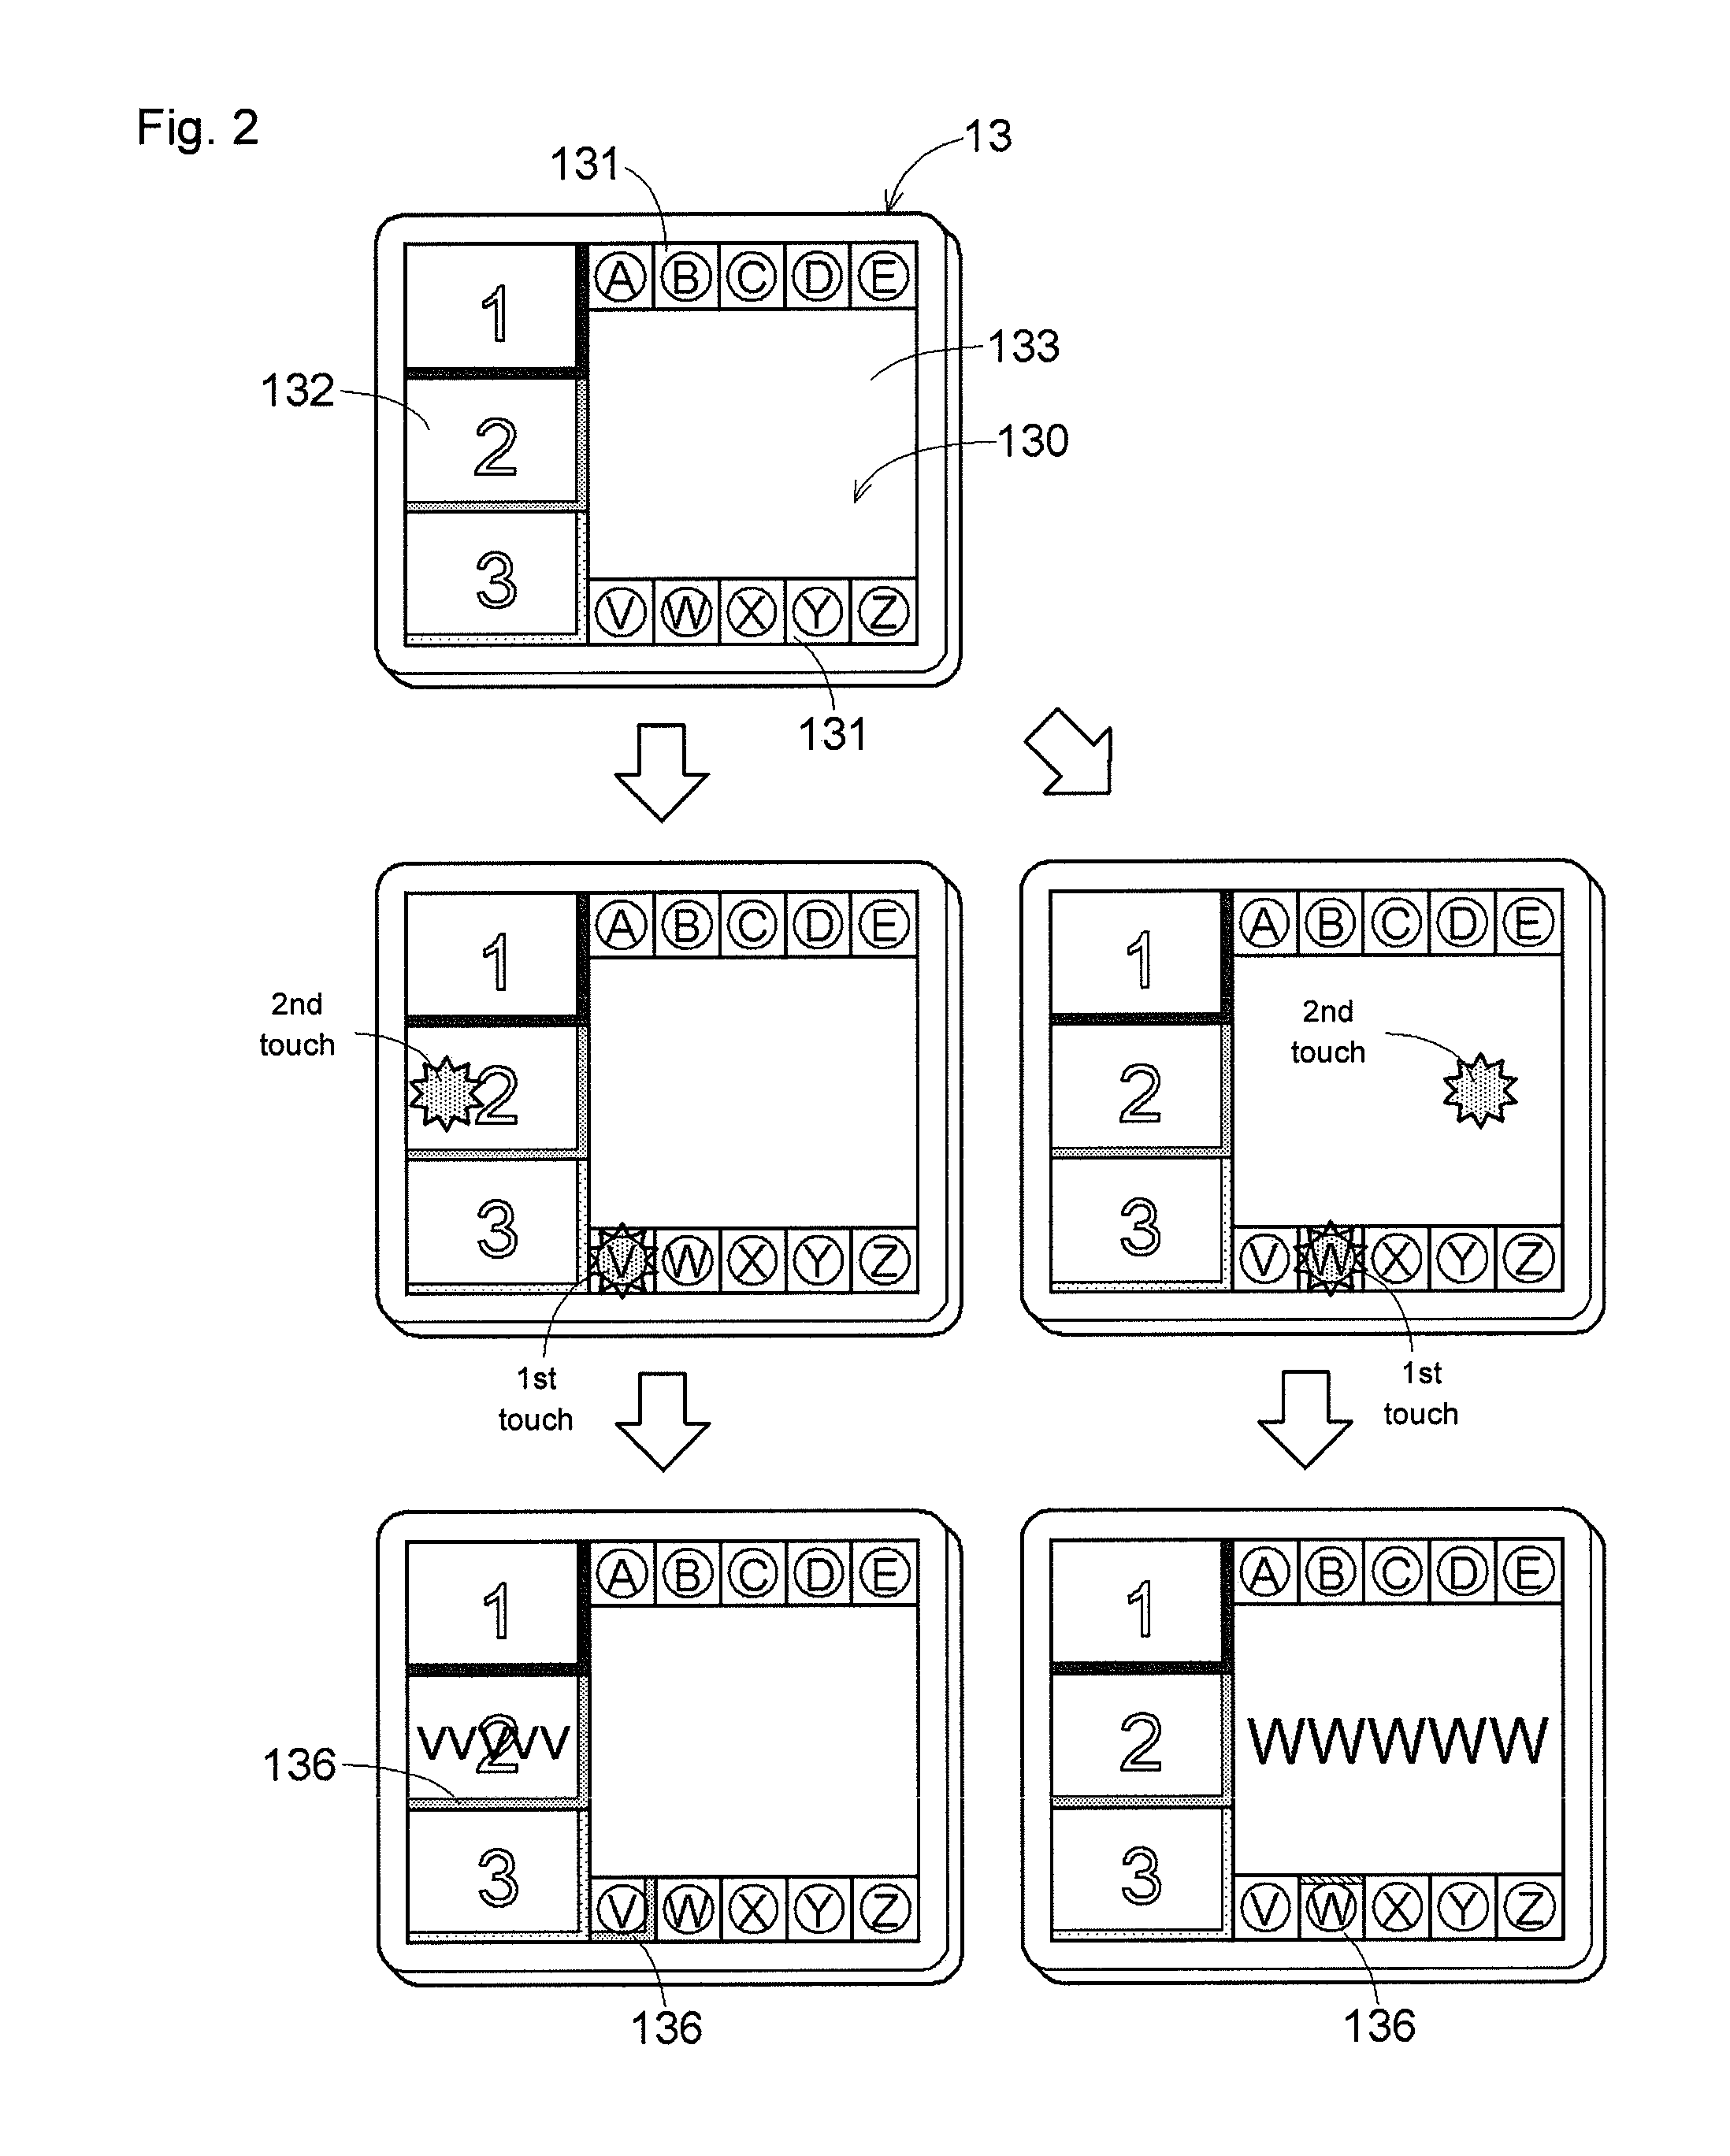 Driving support information display configuration and device using the same